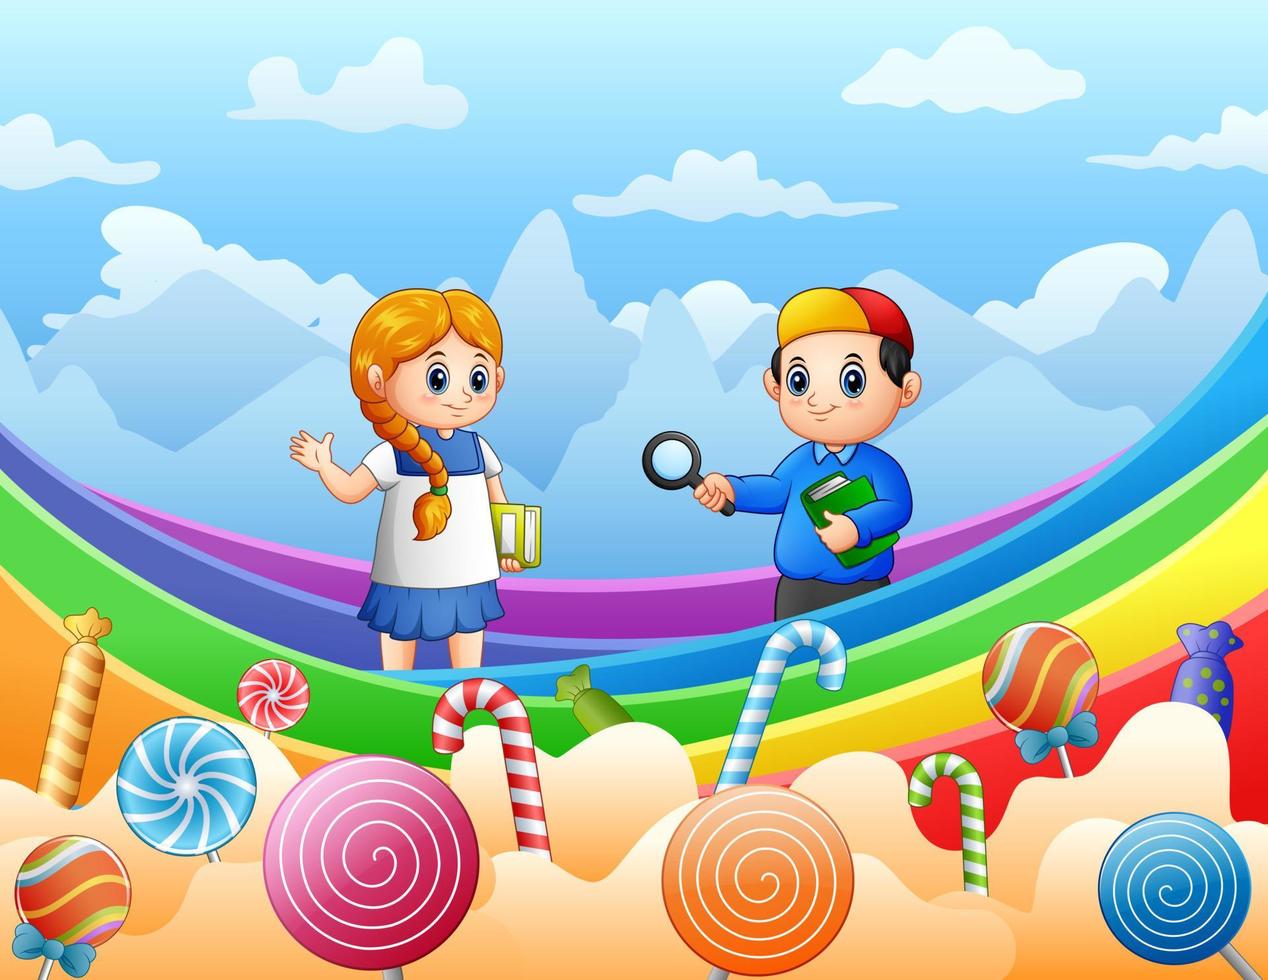 Kids on a rainbow and candies background vector